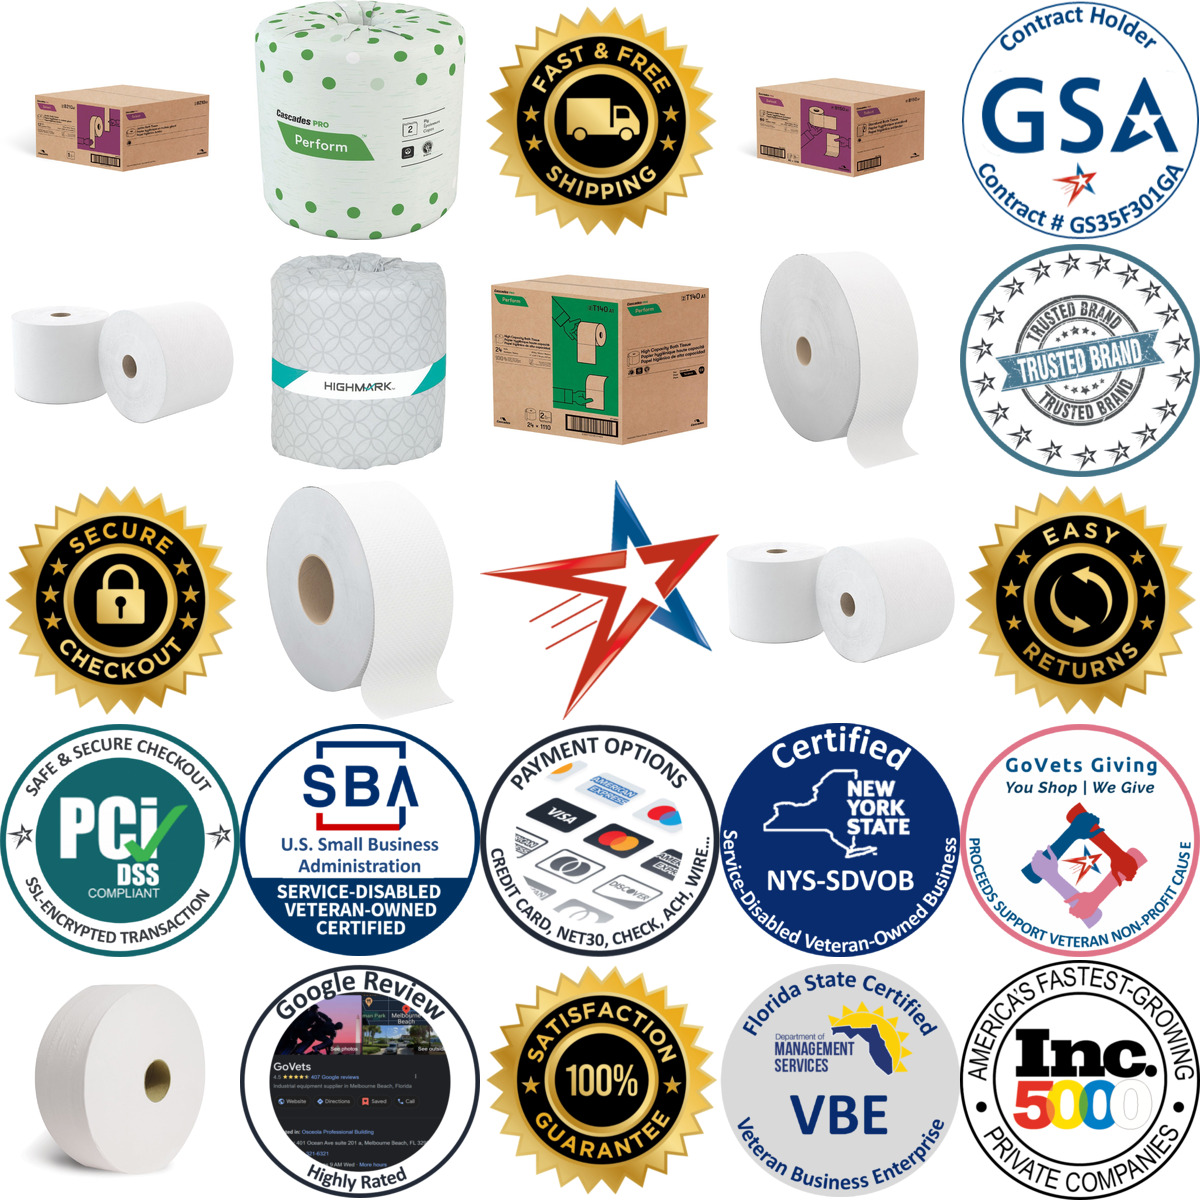 A selection of Cascades Tissue Group products on GoVets